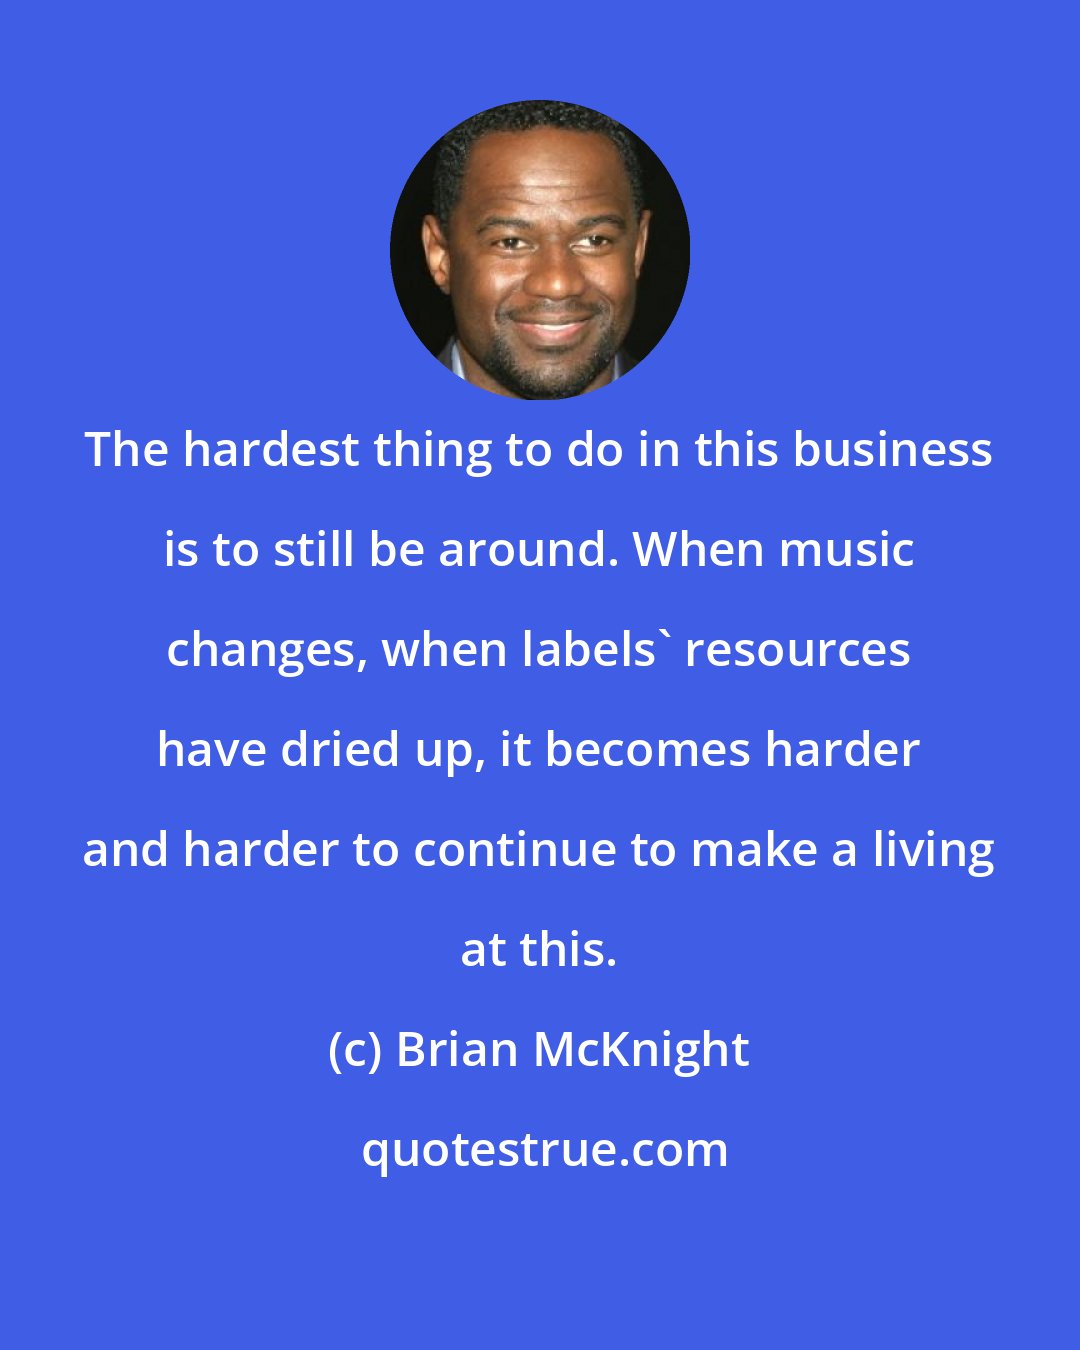 Brian McKnight: The hardest thing to do in this business is to still be around. When music changes, when labels' resources have dried up, it becomes harder and harder to continue to make a living at this.